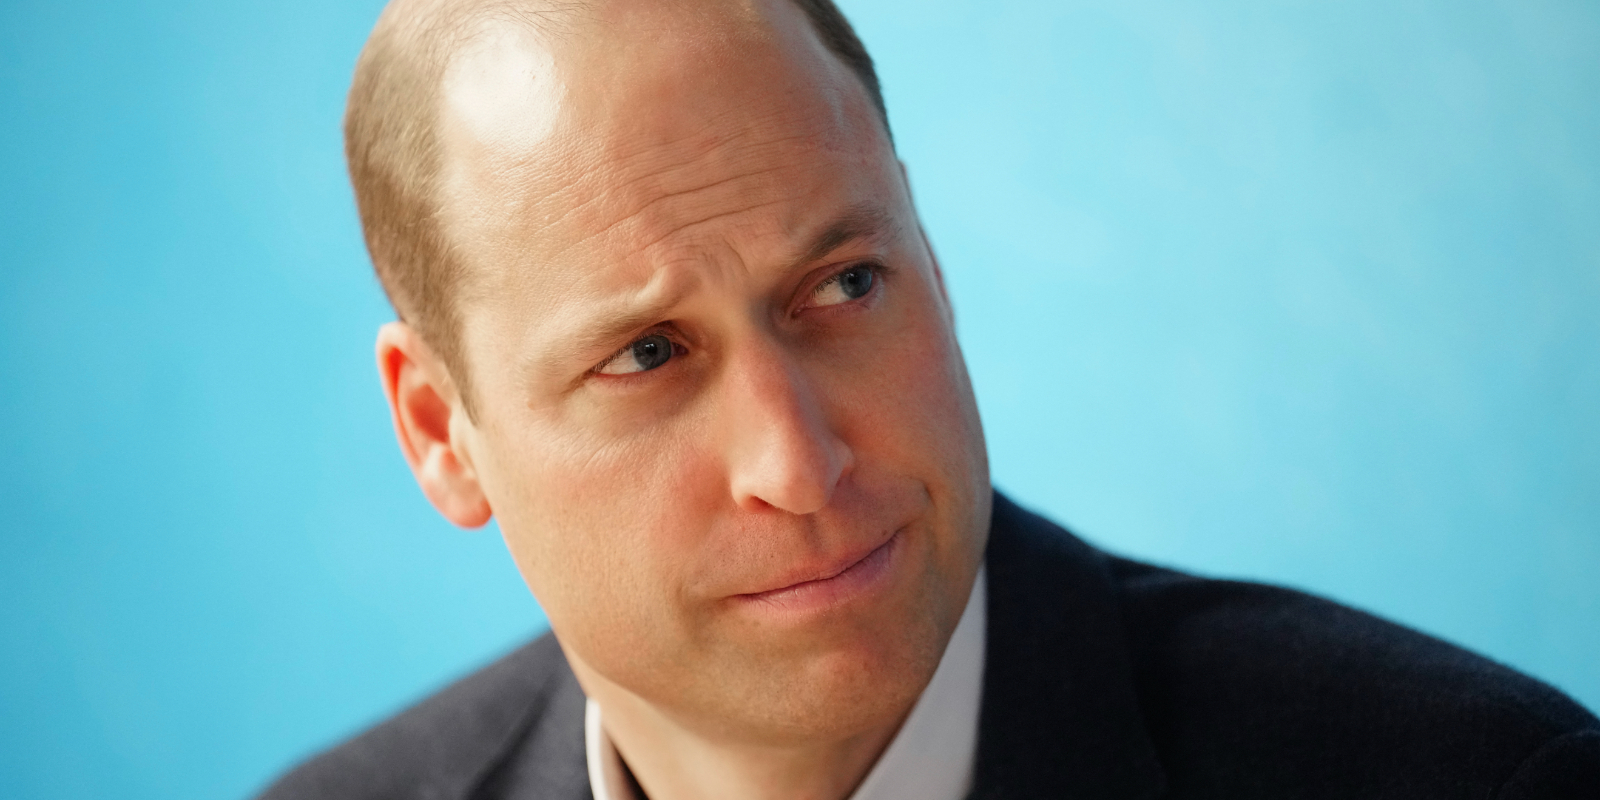 Prince William at the Open Door charity's flagship Bloom Building on January 12, 2023 in Birkenhead, England.